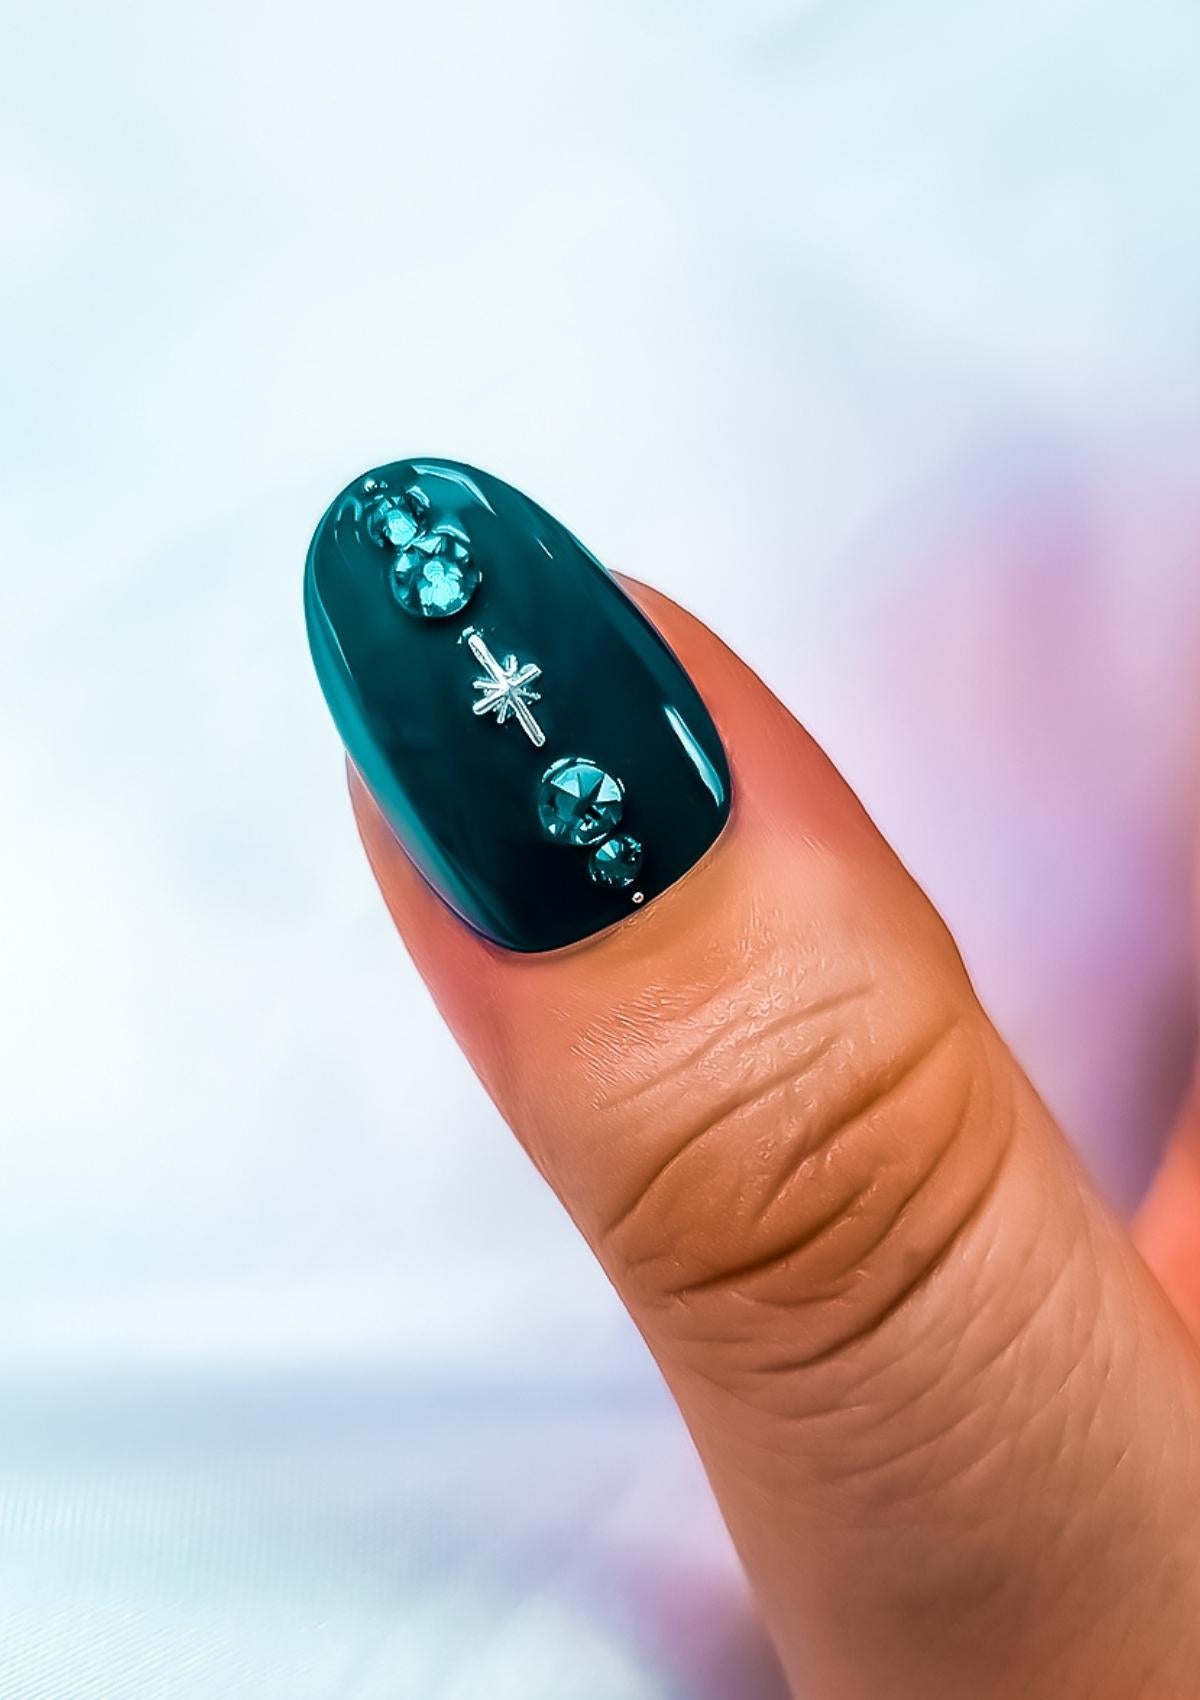 Short oval shaped  thumb nail in teal with silver star charm and teal crystals.